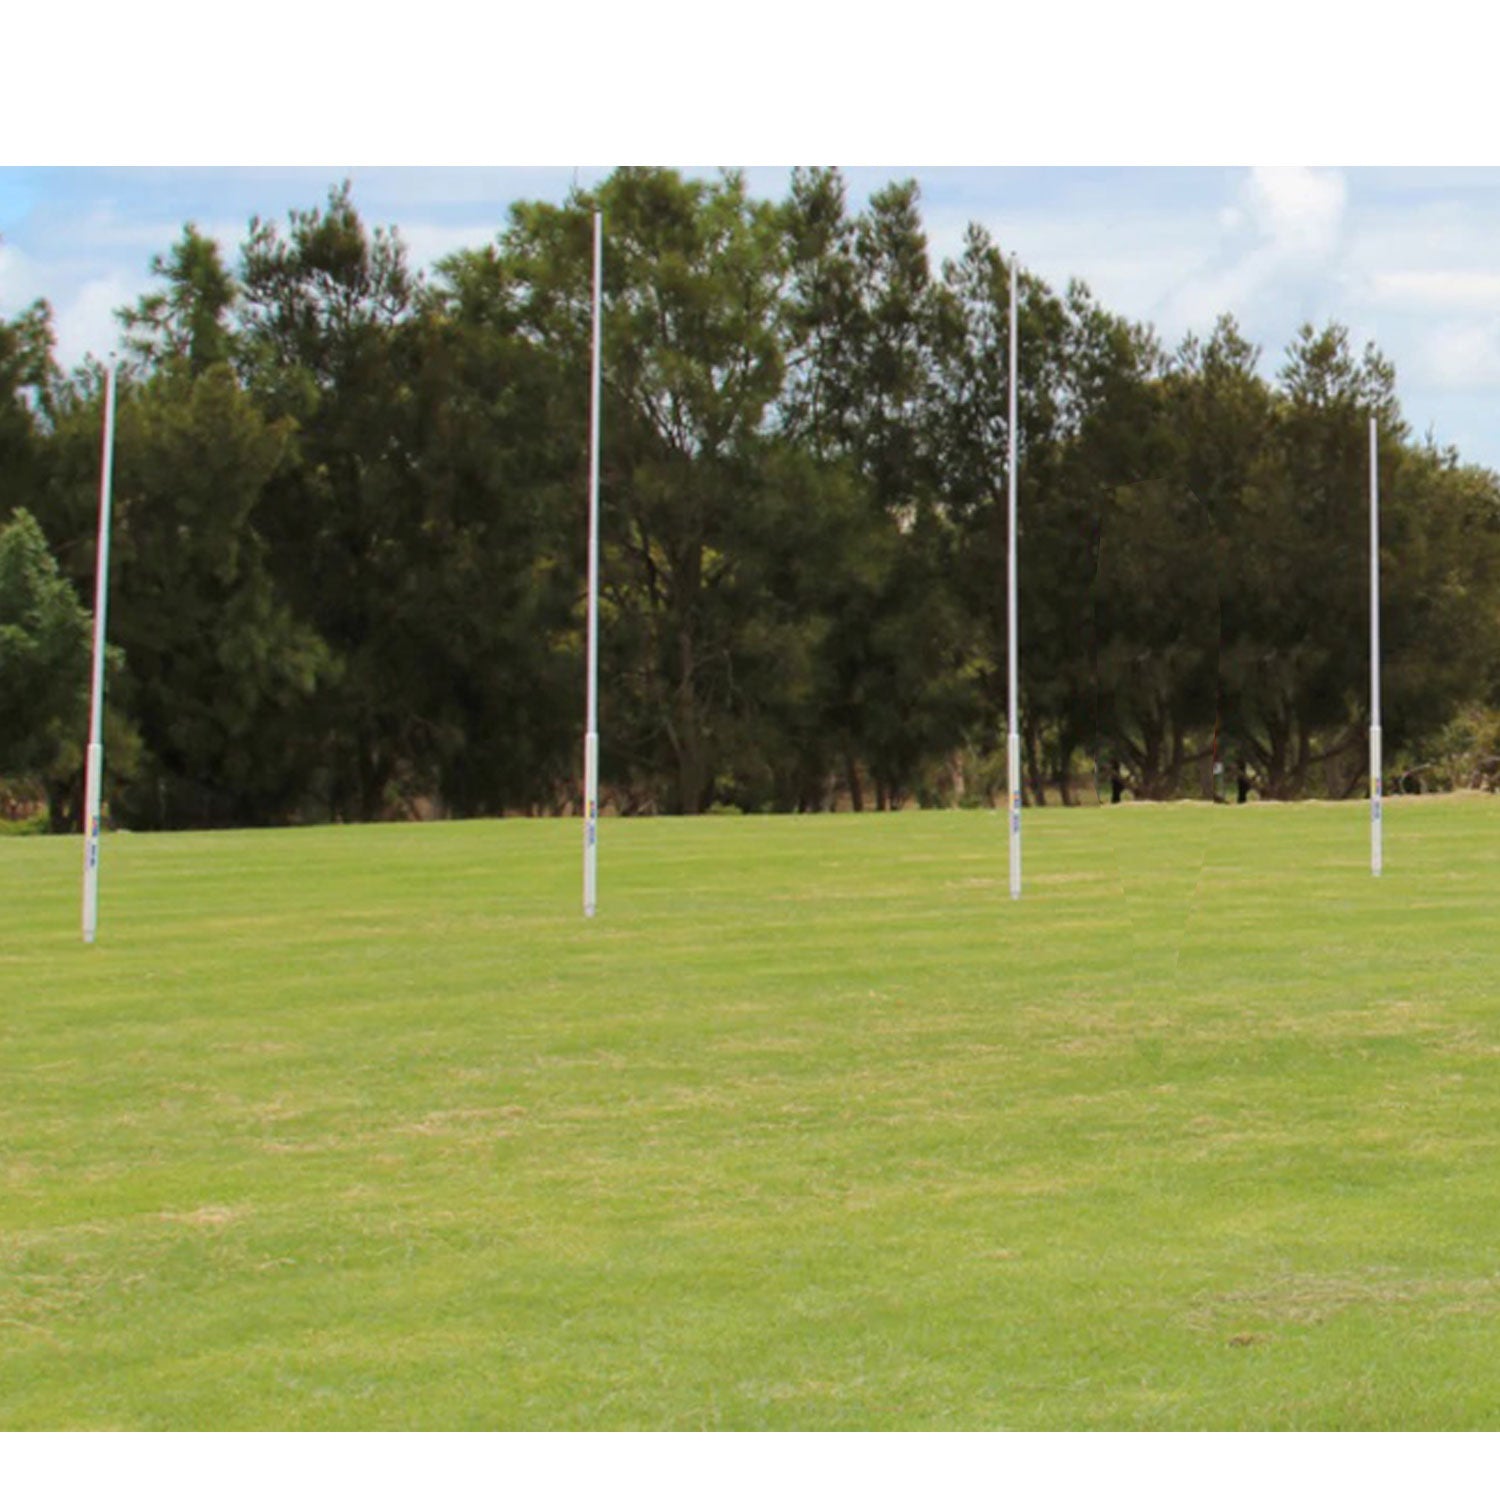 Home Ground Portable Footy Goals